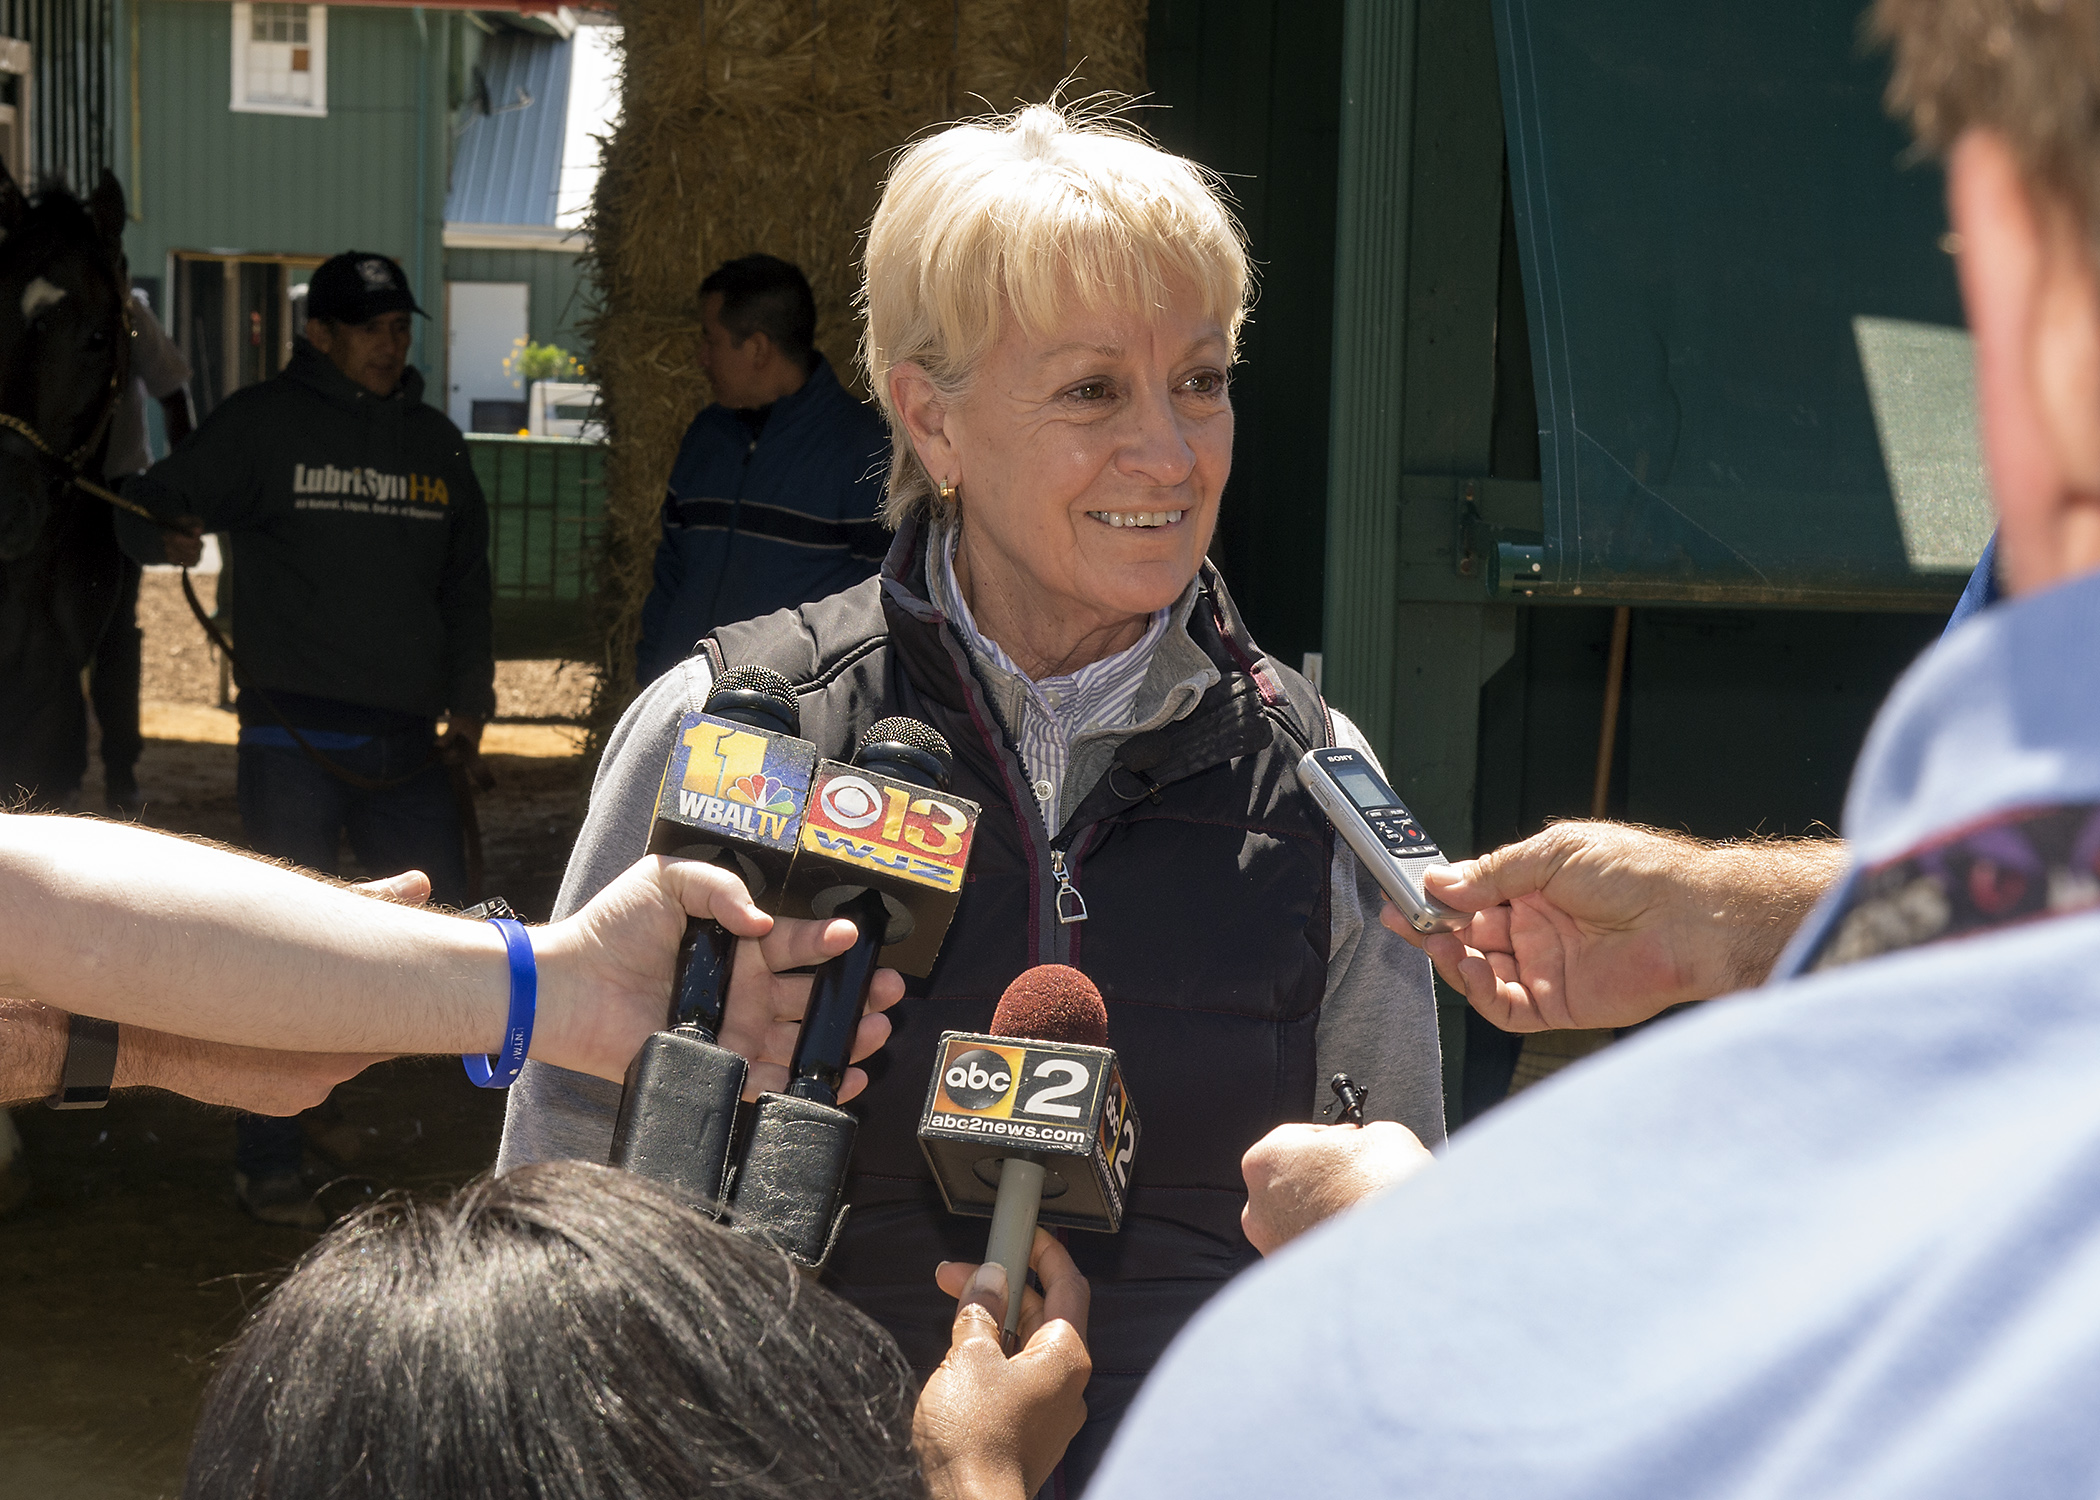 Handling the media: Ginny DePasquale fields questions about Always Dreaming after the colt arrived at Pimlico ahead of the Preakness Stakes. Photo: Pimlico Race Course